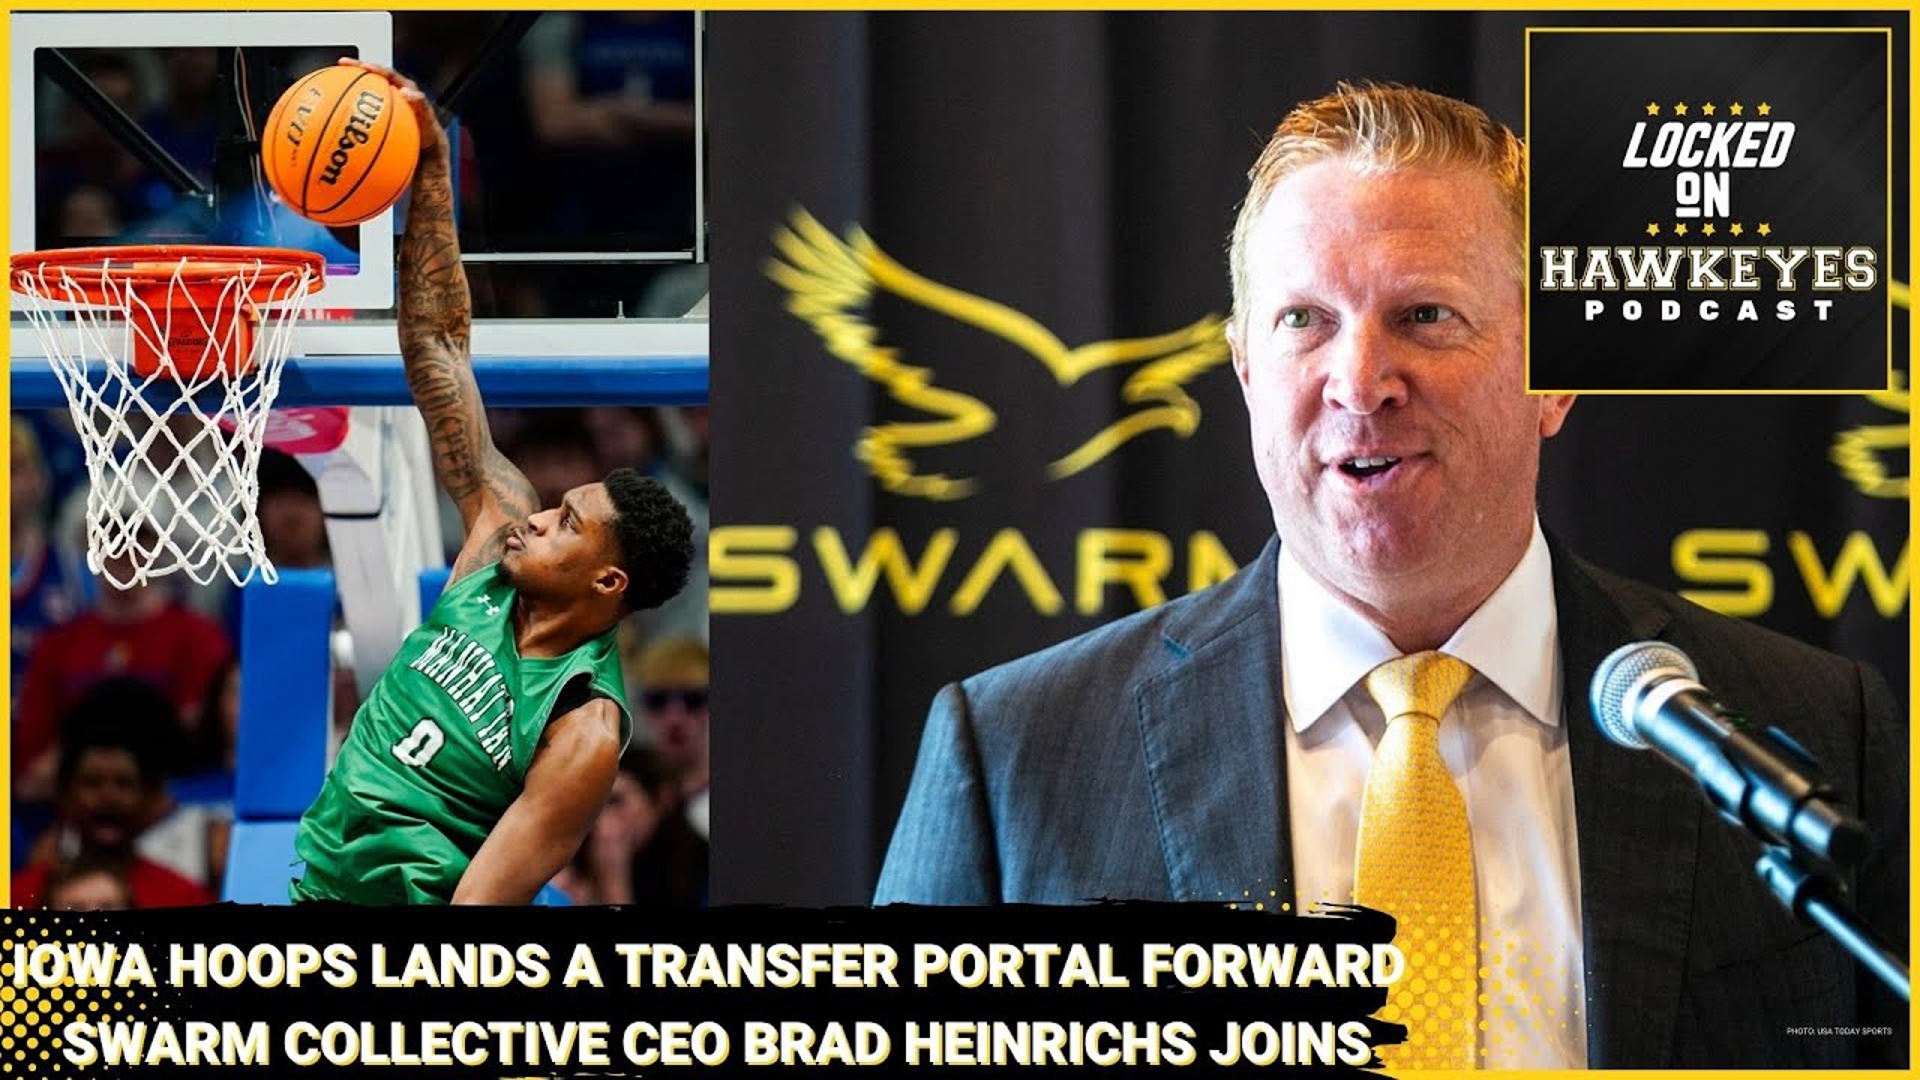 Iowa Hoops adds another player from the portal, Hawkeye Swarm CEO Brad Heinrichs joins